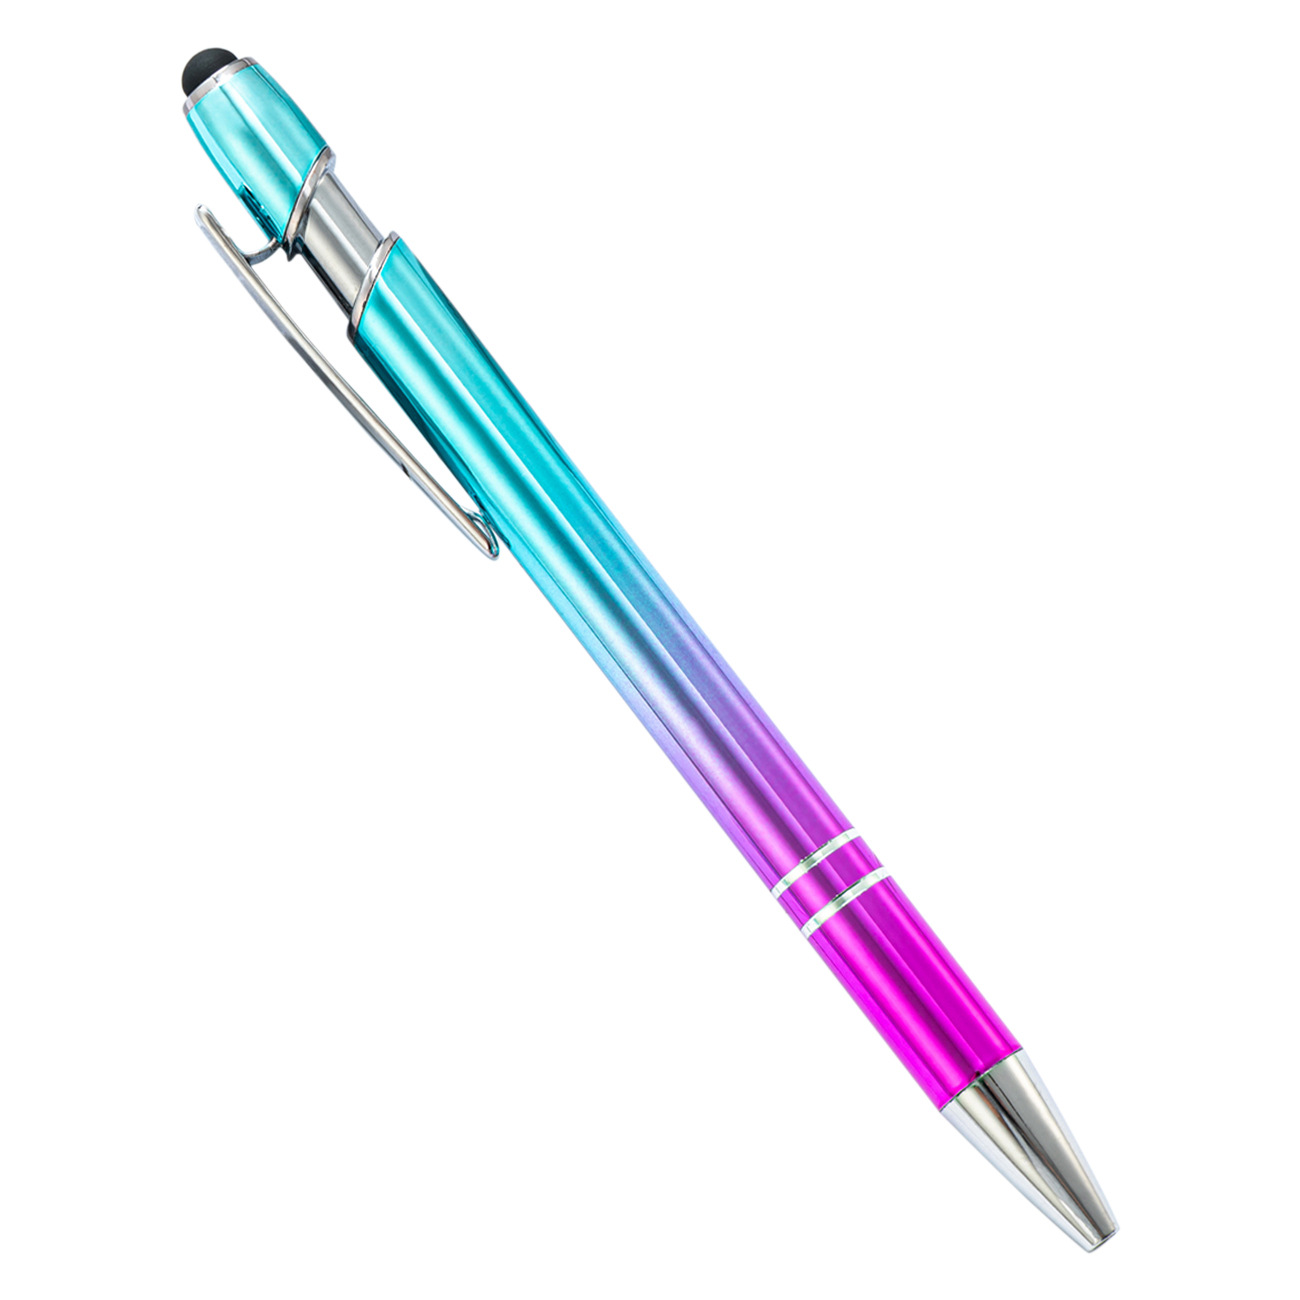 Gradient Color Retractable Ballpoint Pen with Stylus Tip 1.0mm Metal Pen for Touch Screens School Office Gift Supplies